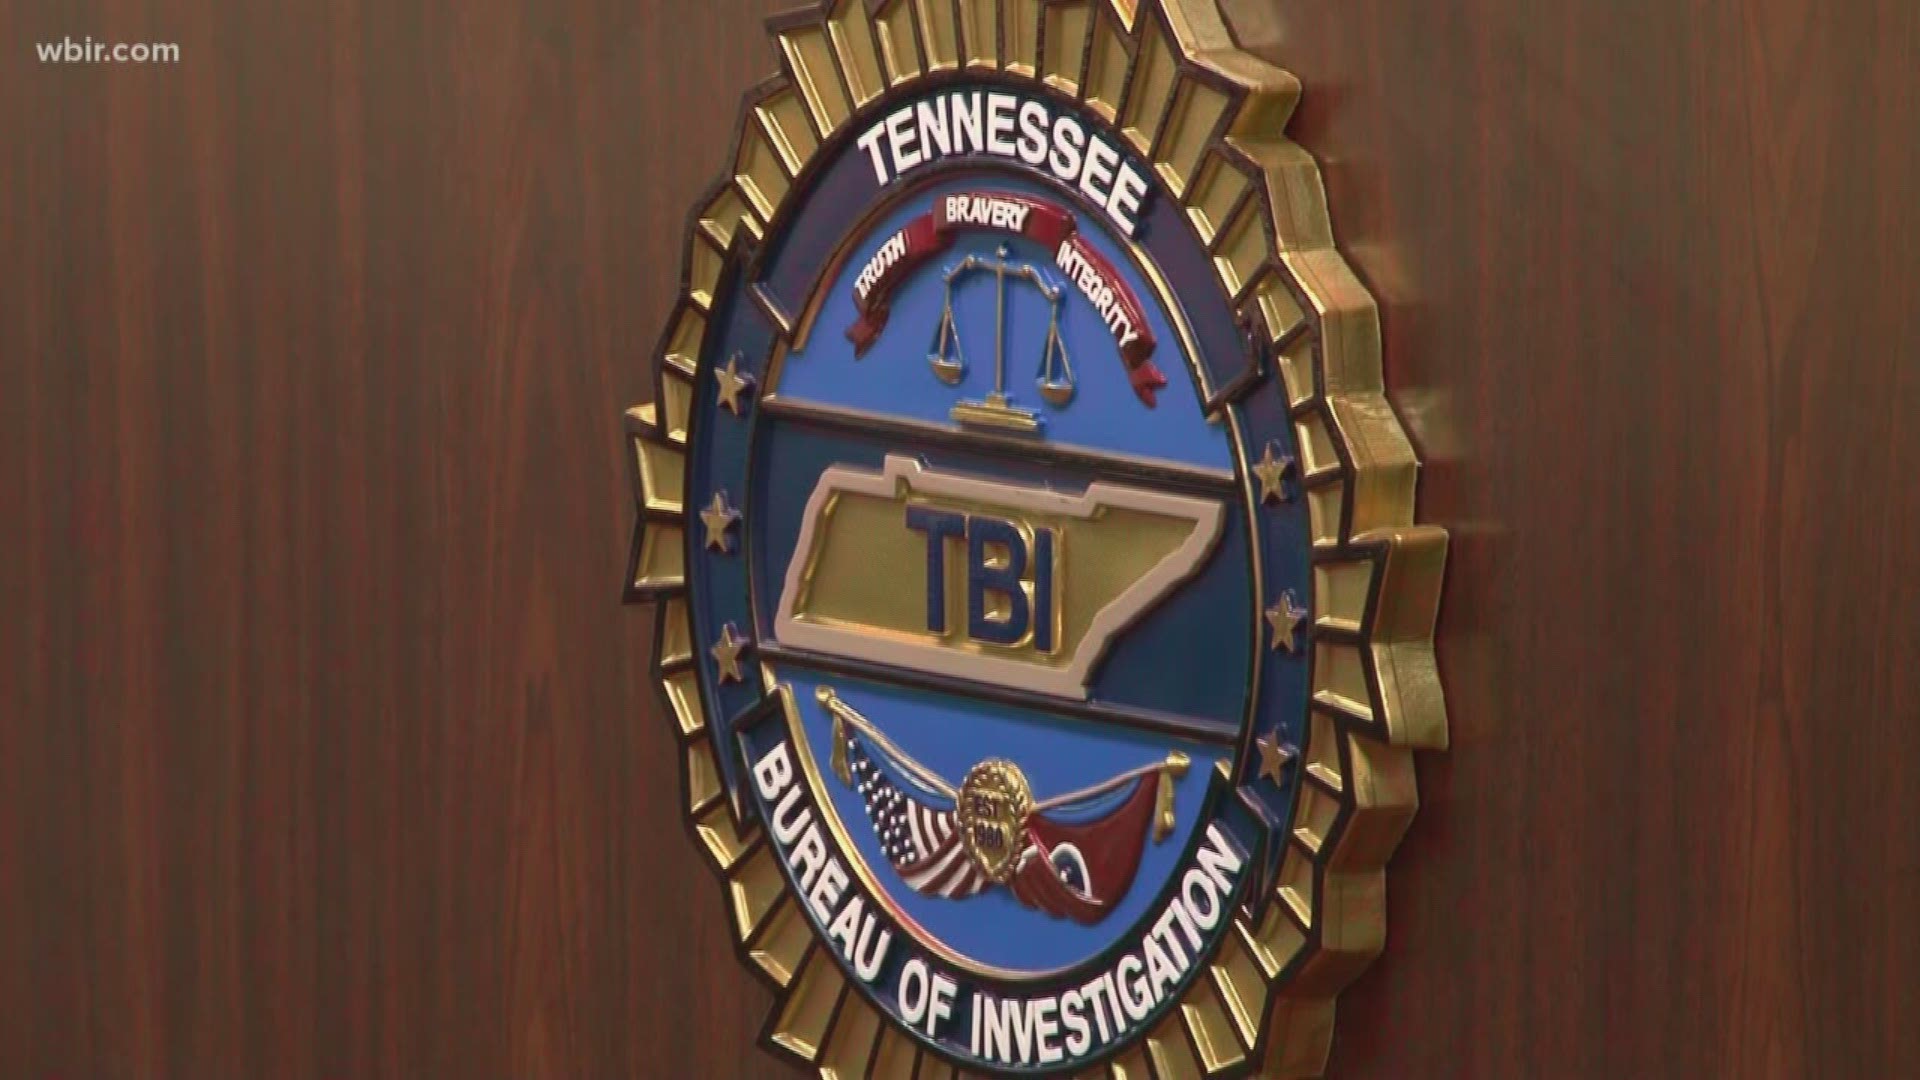 The TBI is hoping to increase the number of law enforcement officials specifically targeting opioid abuse.